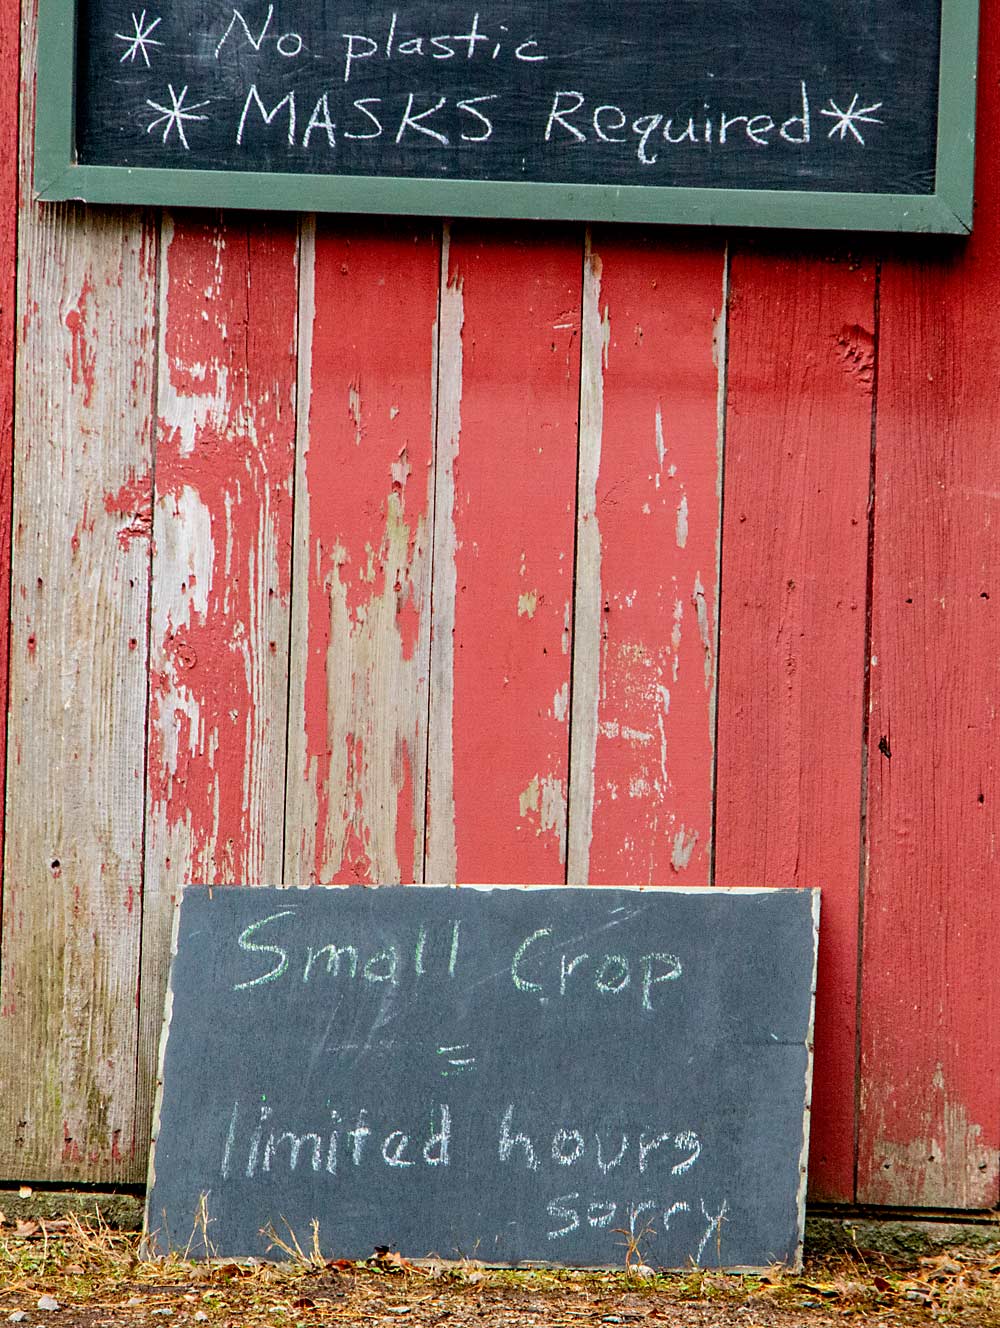 Market signs at the Doud farm last October. A May freeze killed nearly 90 percent of their tree fruit last year, so they kept their market open only two days a week in the fall. And because of the coronavirus, masks were required. (Matt Milkovich/Good Fruit Grower)